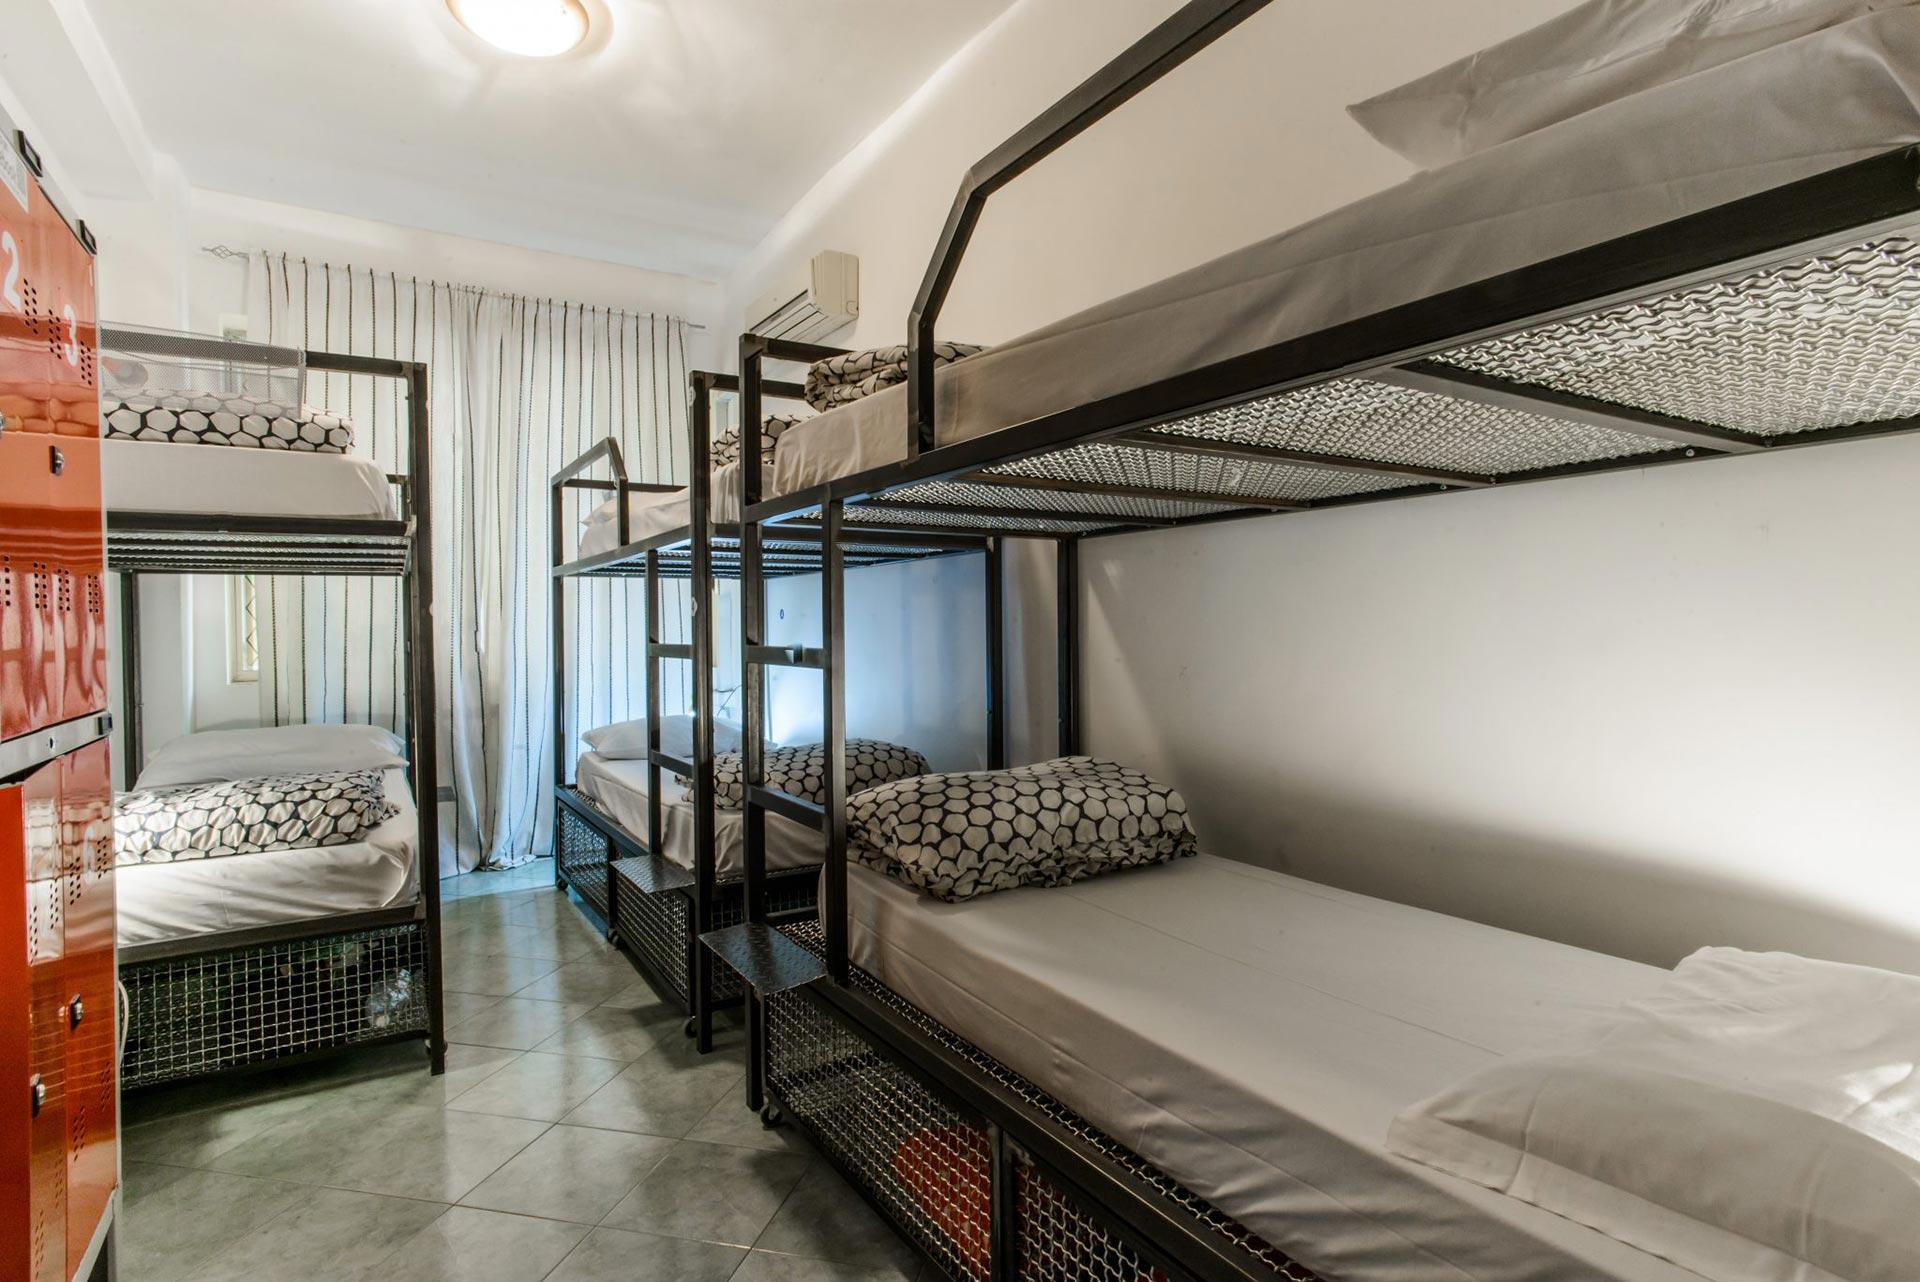 Accommodation in Naples